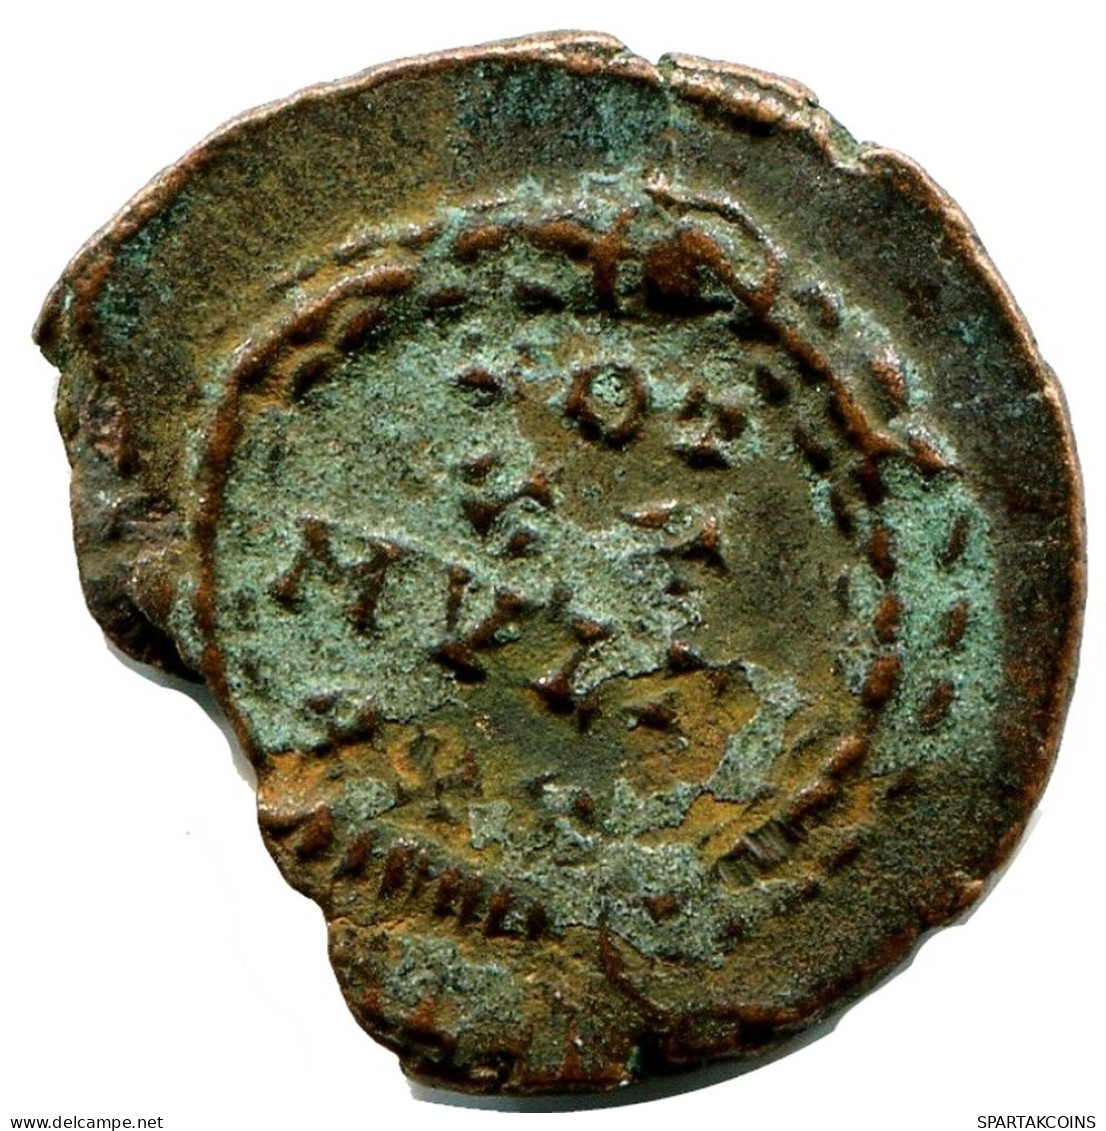 CONSTANS MINTED IN ALEKSANDRIA FROM THE ROYAL ONTARIO MUSEUM #ANC11481.14.D.A - L'Empire Chrétien (307 à 363)